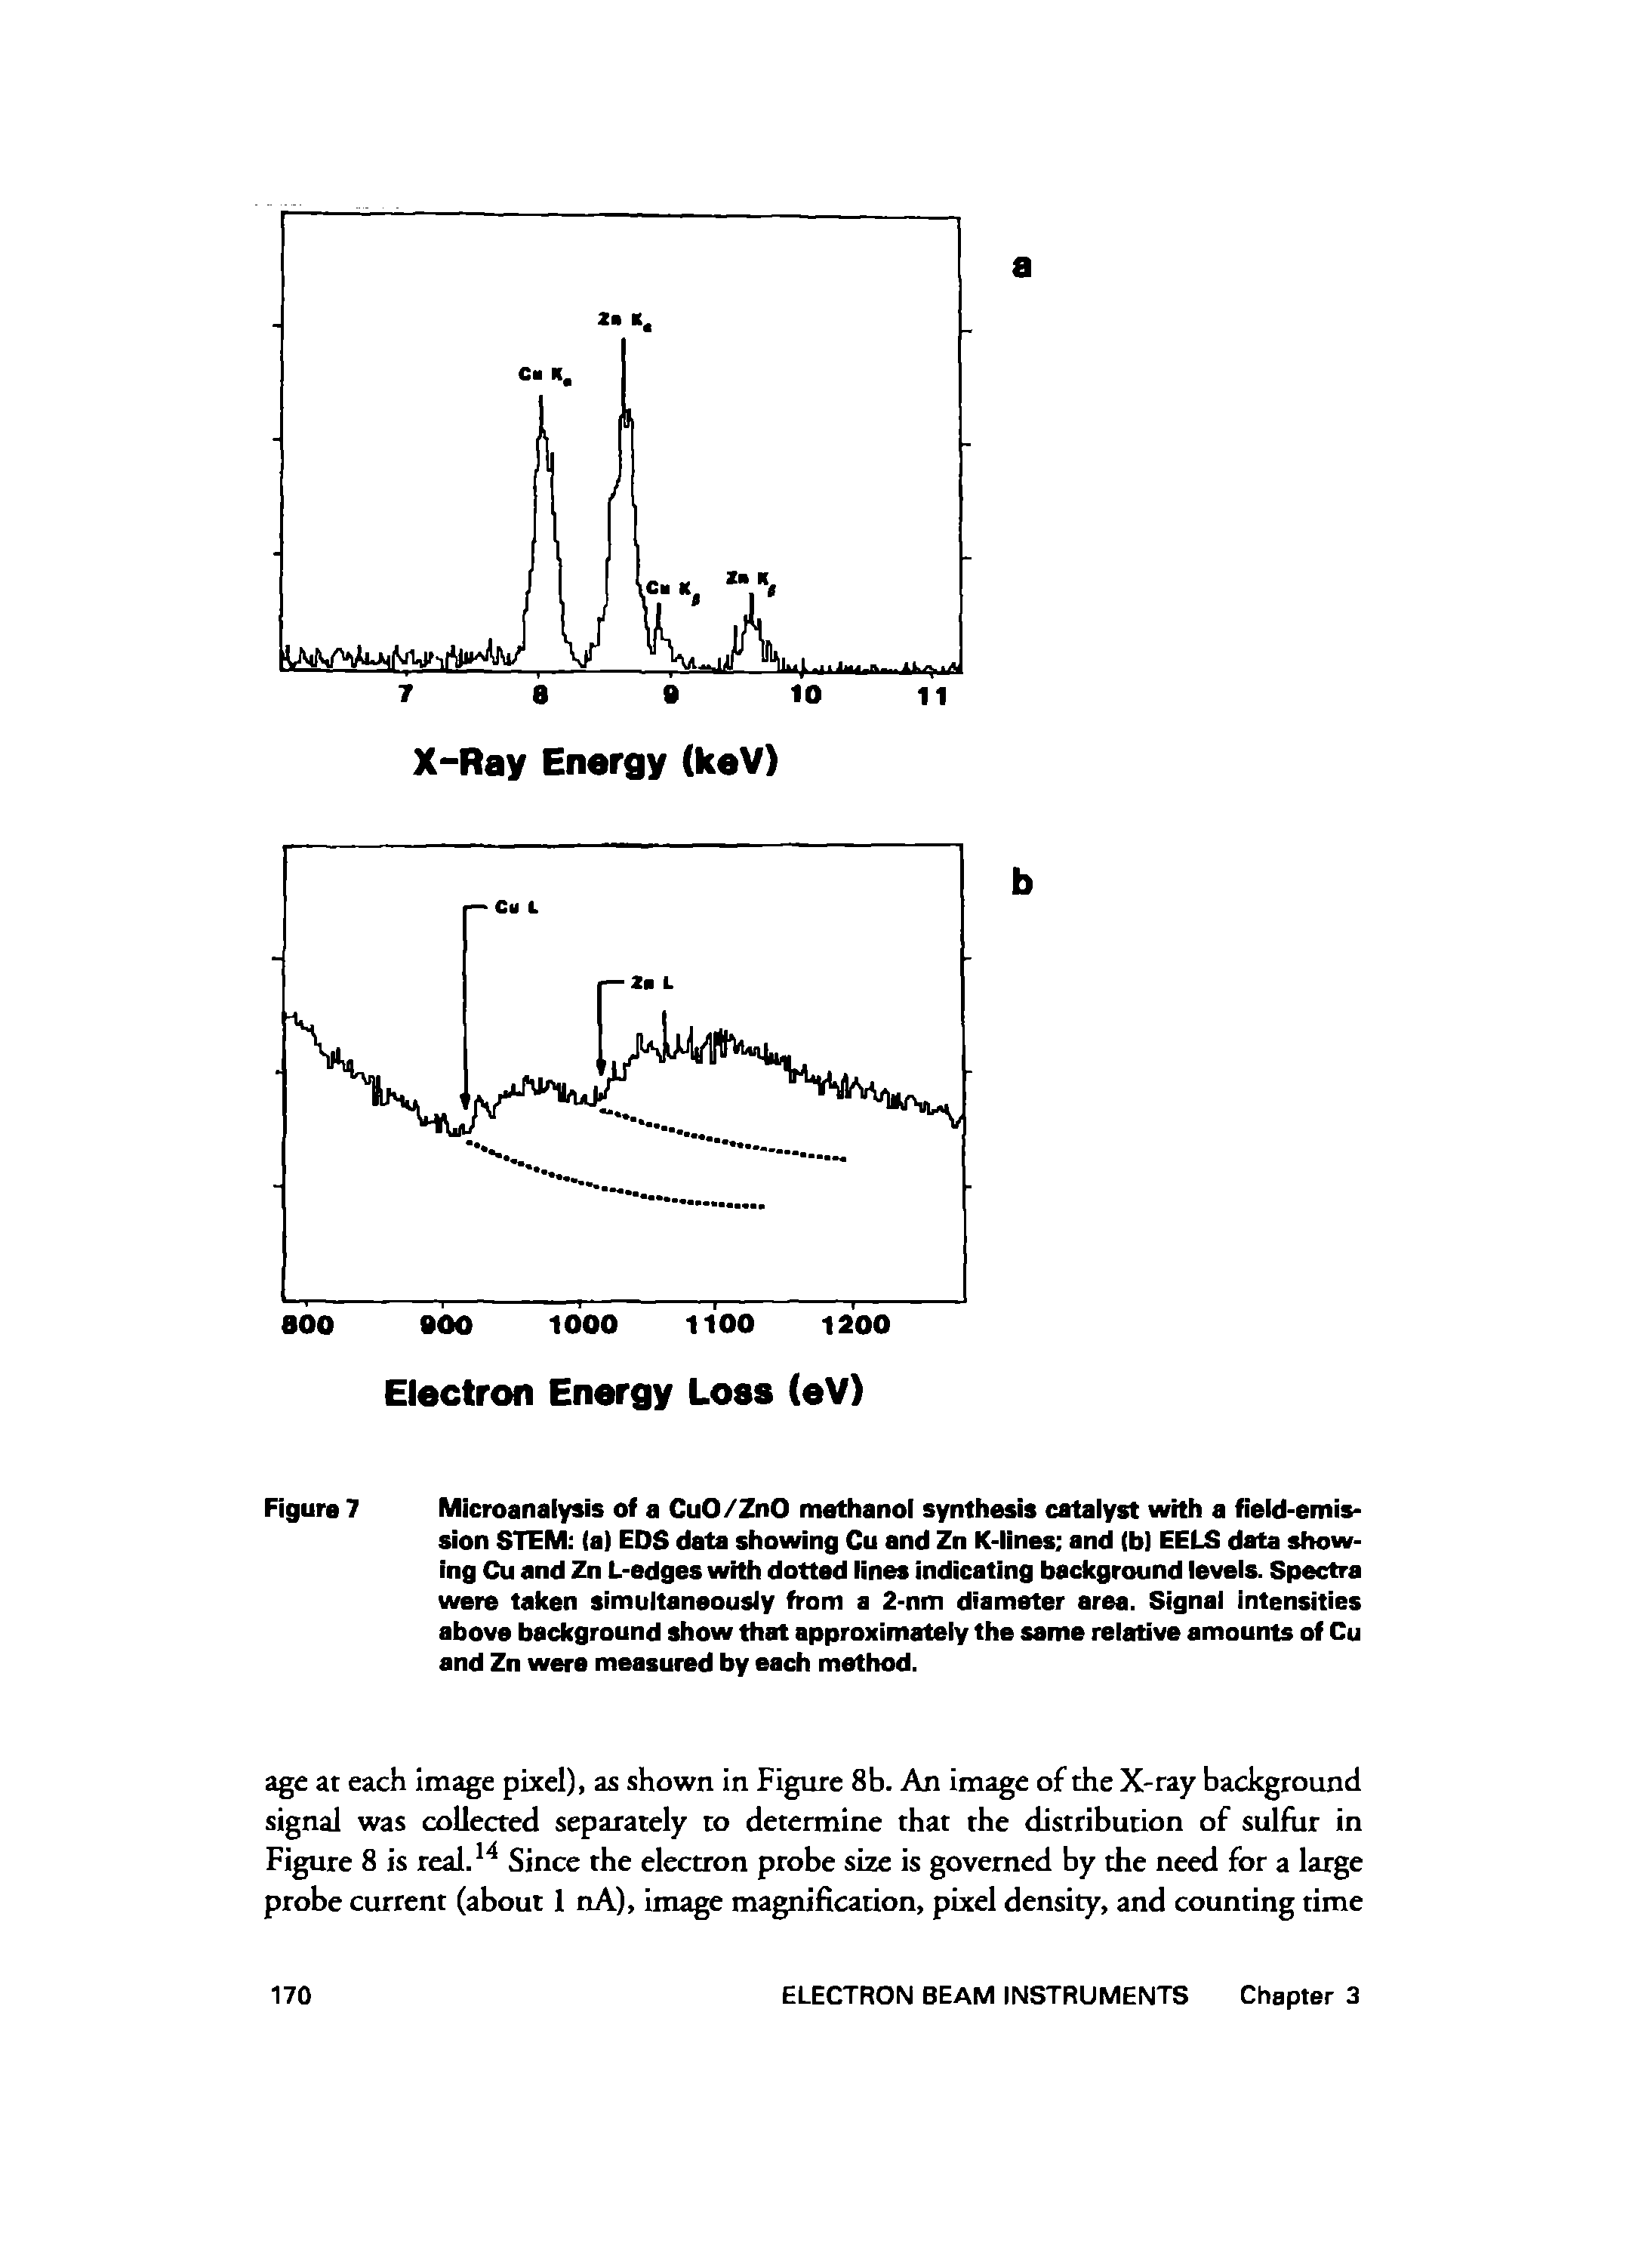 Figure 7 Microanalysis of a CuO/ZnO methanol synthesis catalyst with a field-emission STEM (a) EOS data showing Cu and Zn K-lines and (b) EELS data showing Cu and Zn L-edges with dotted lines indicating background levels. Spectra were taken simultaneously from a 2-nm diameter area. Signal intensities above background show that approximately the same relative amounts of Cu and Zn were measured by each method.